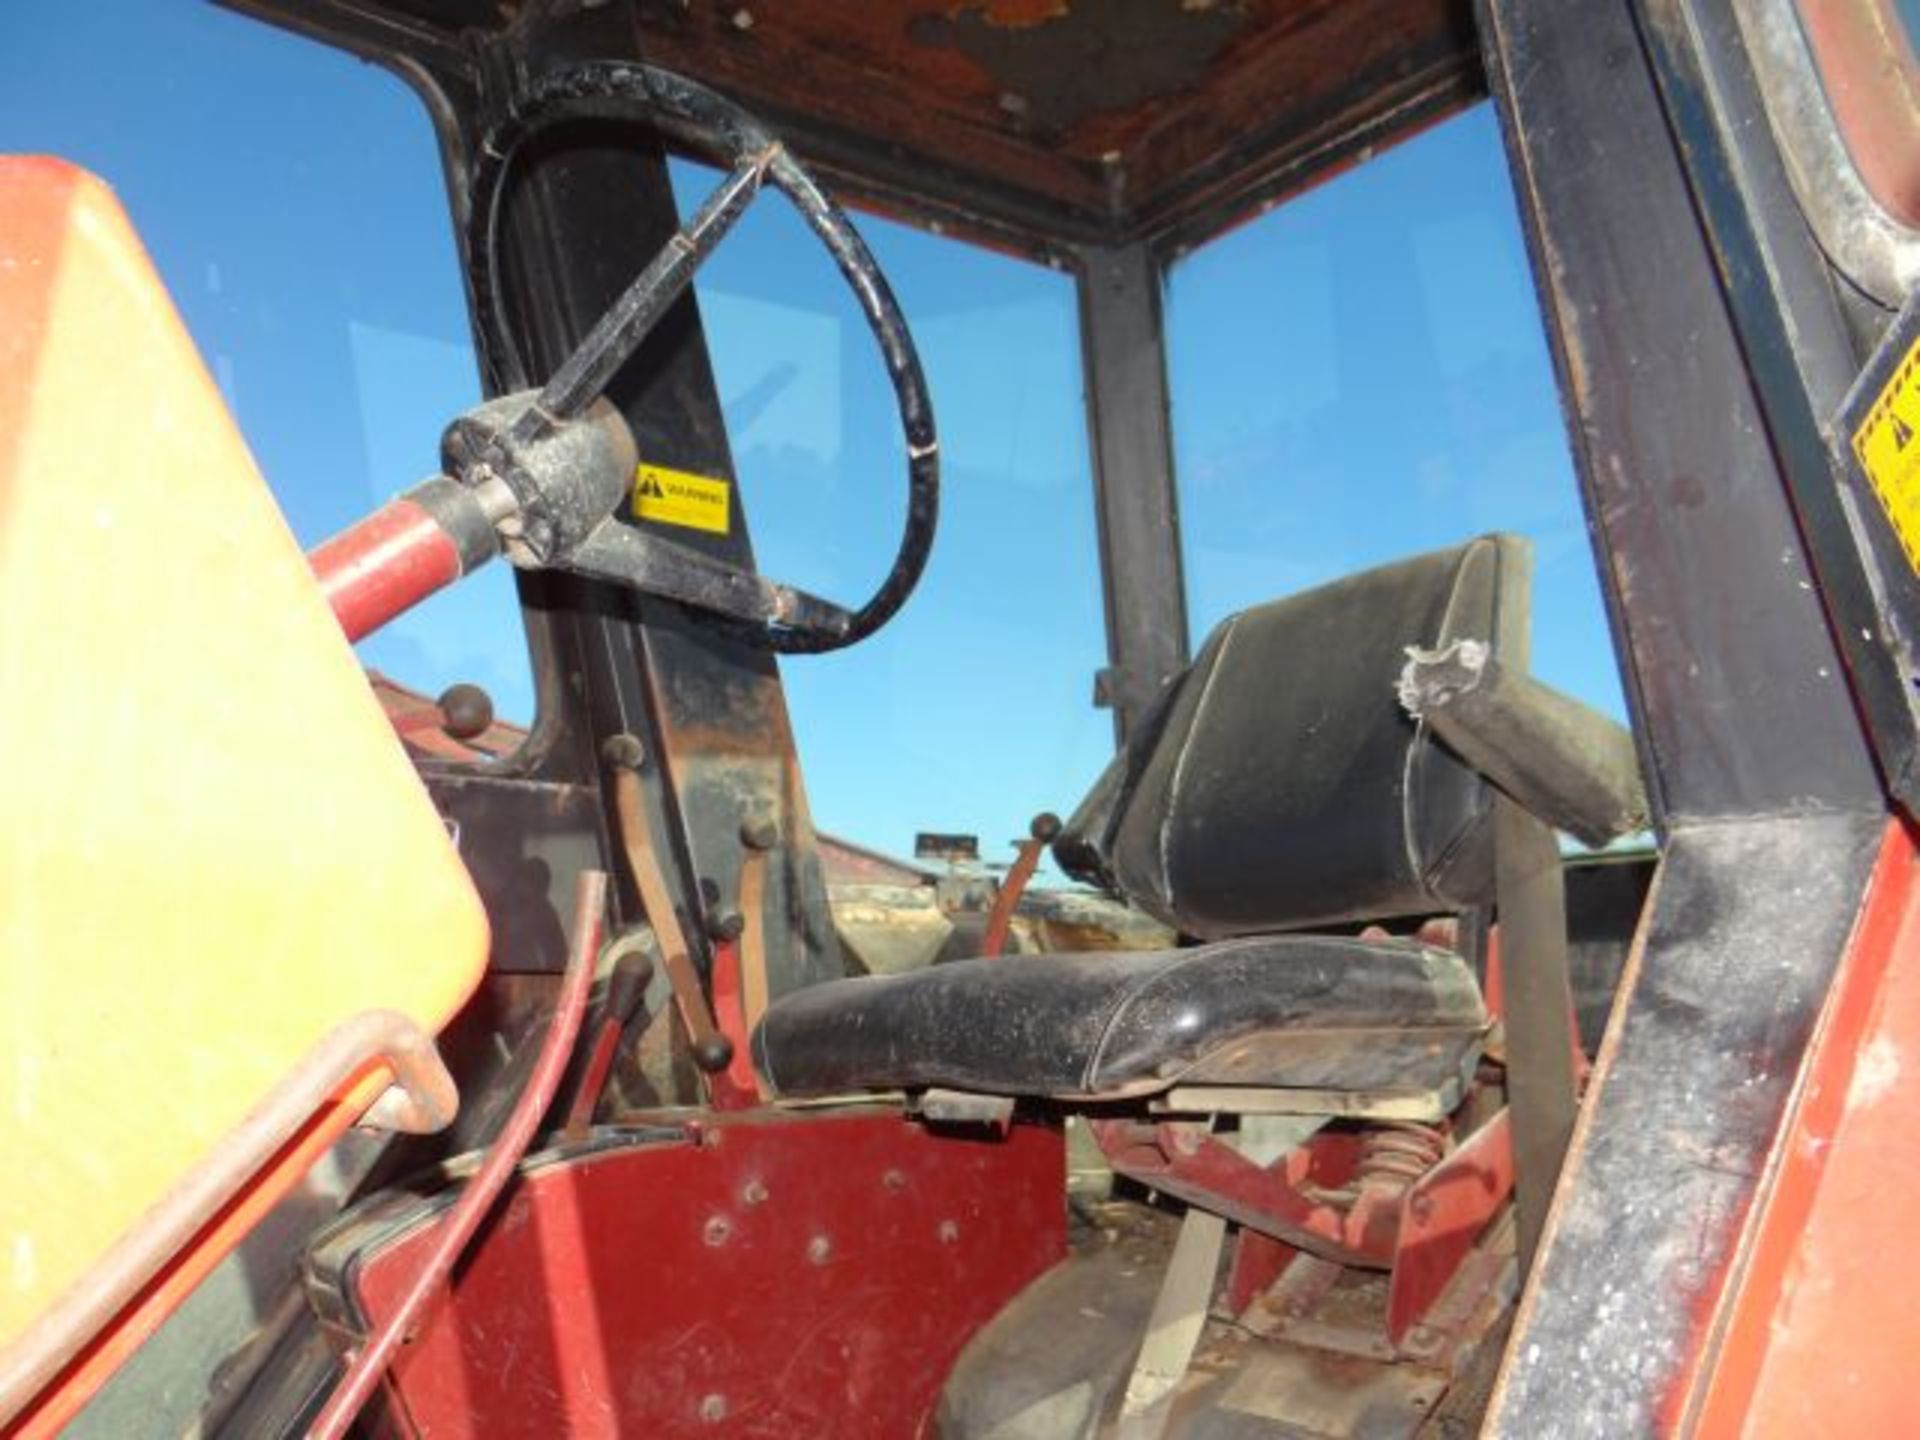 AC 7050 Tractor Diesel, Good Rubber, Does Not Run - Image 4 of 4